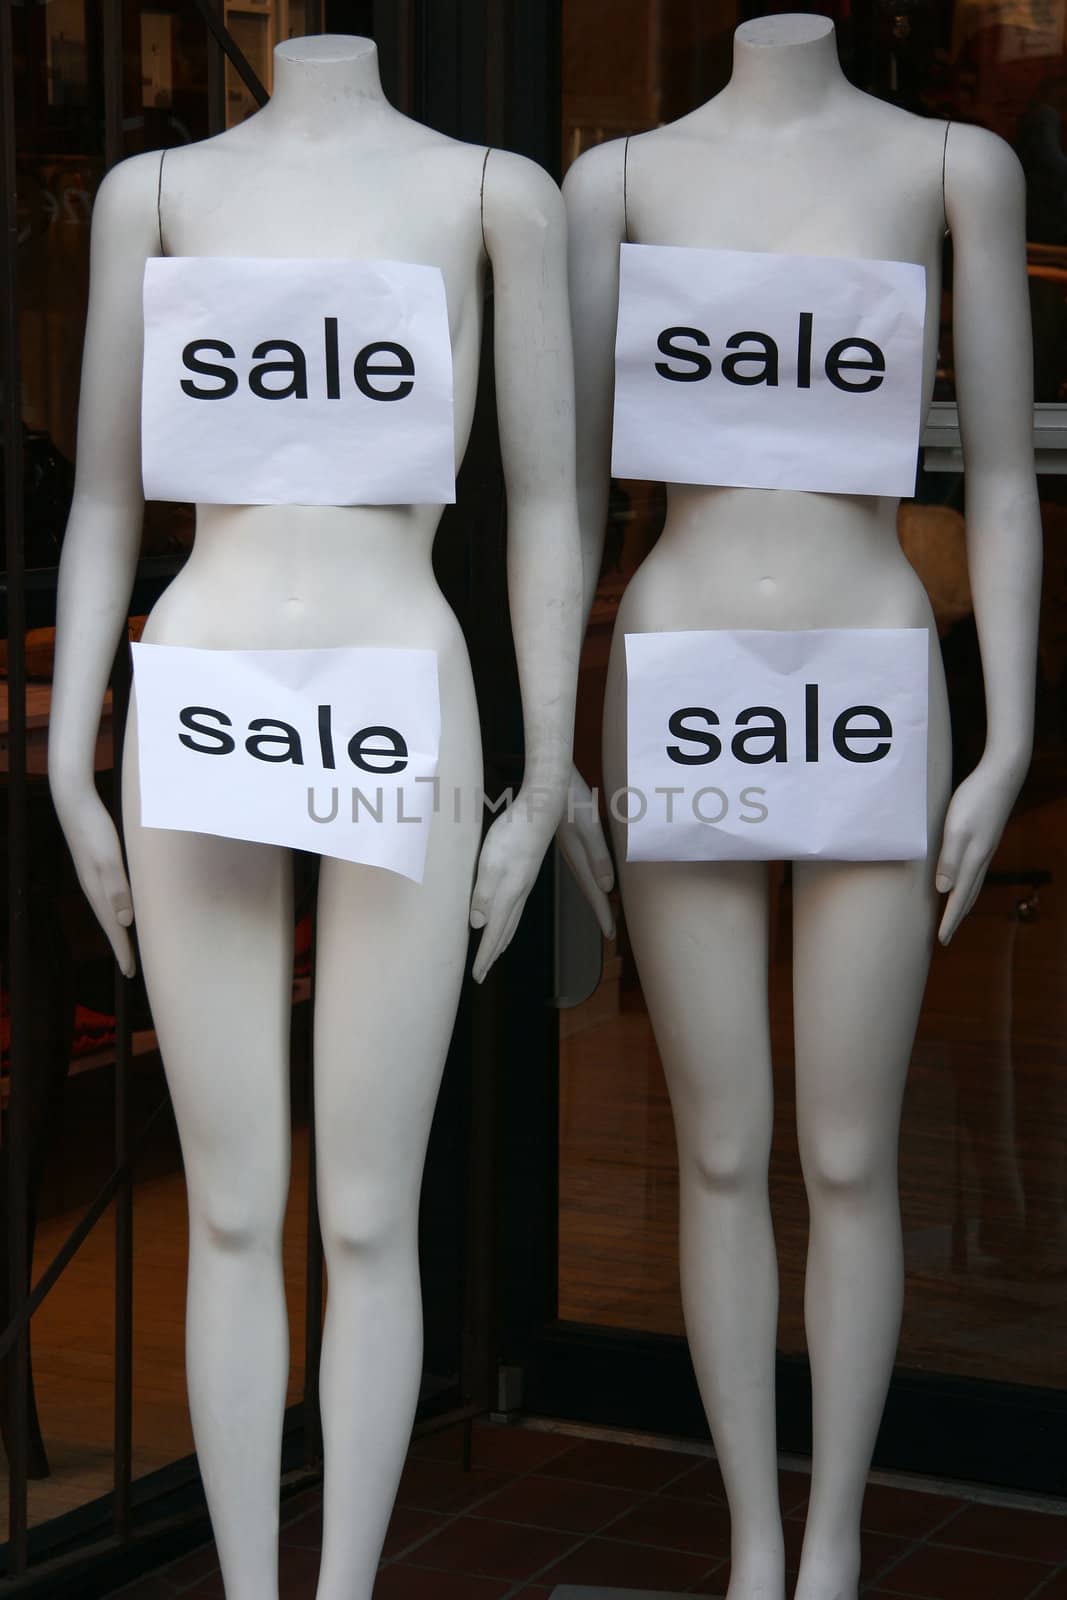 Sale signs on mannequins